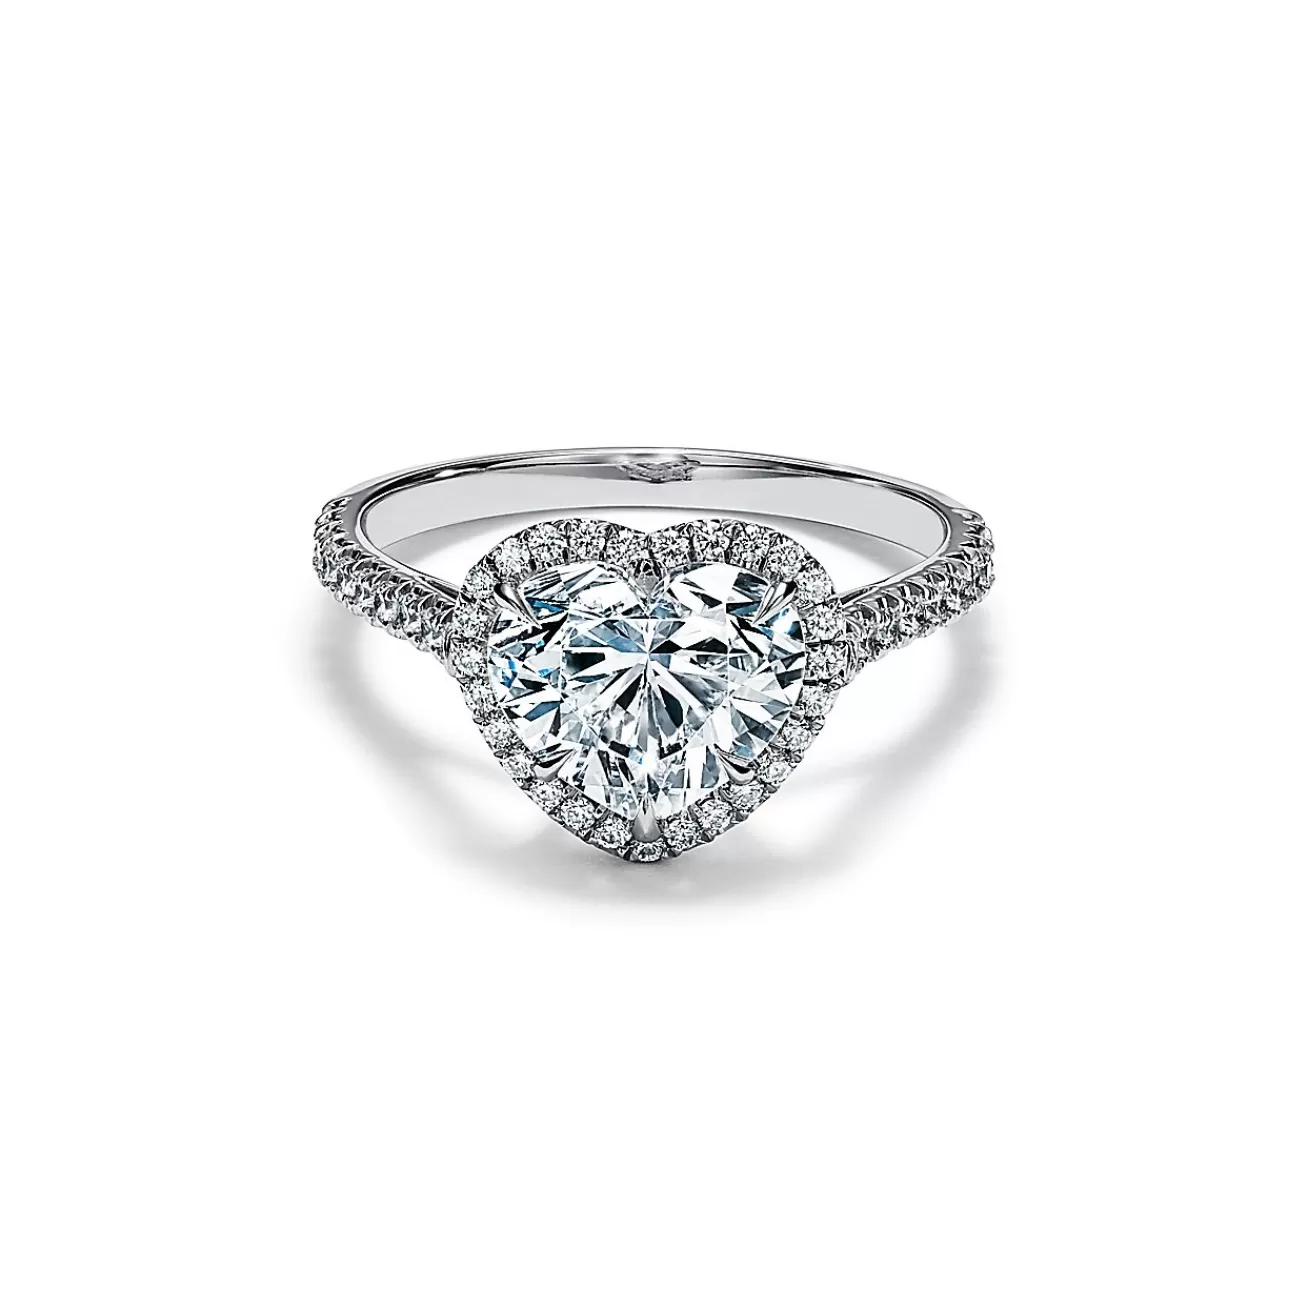 Tiffany & Co. Tiffany Soleste® heart-shaped halo engagement ring with a diamond platinum band. | ^ Engagement Rings